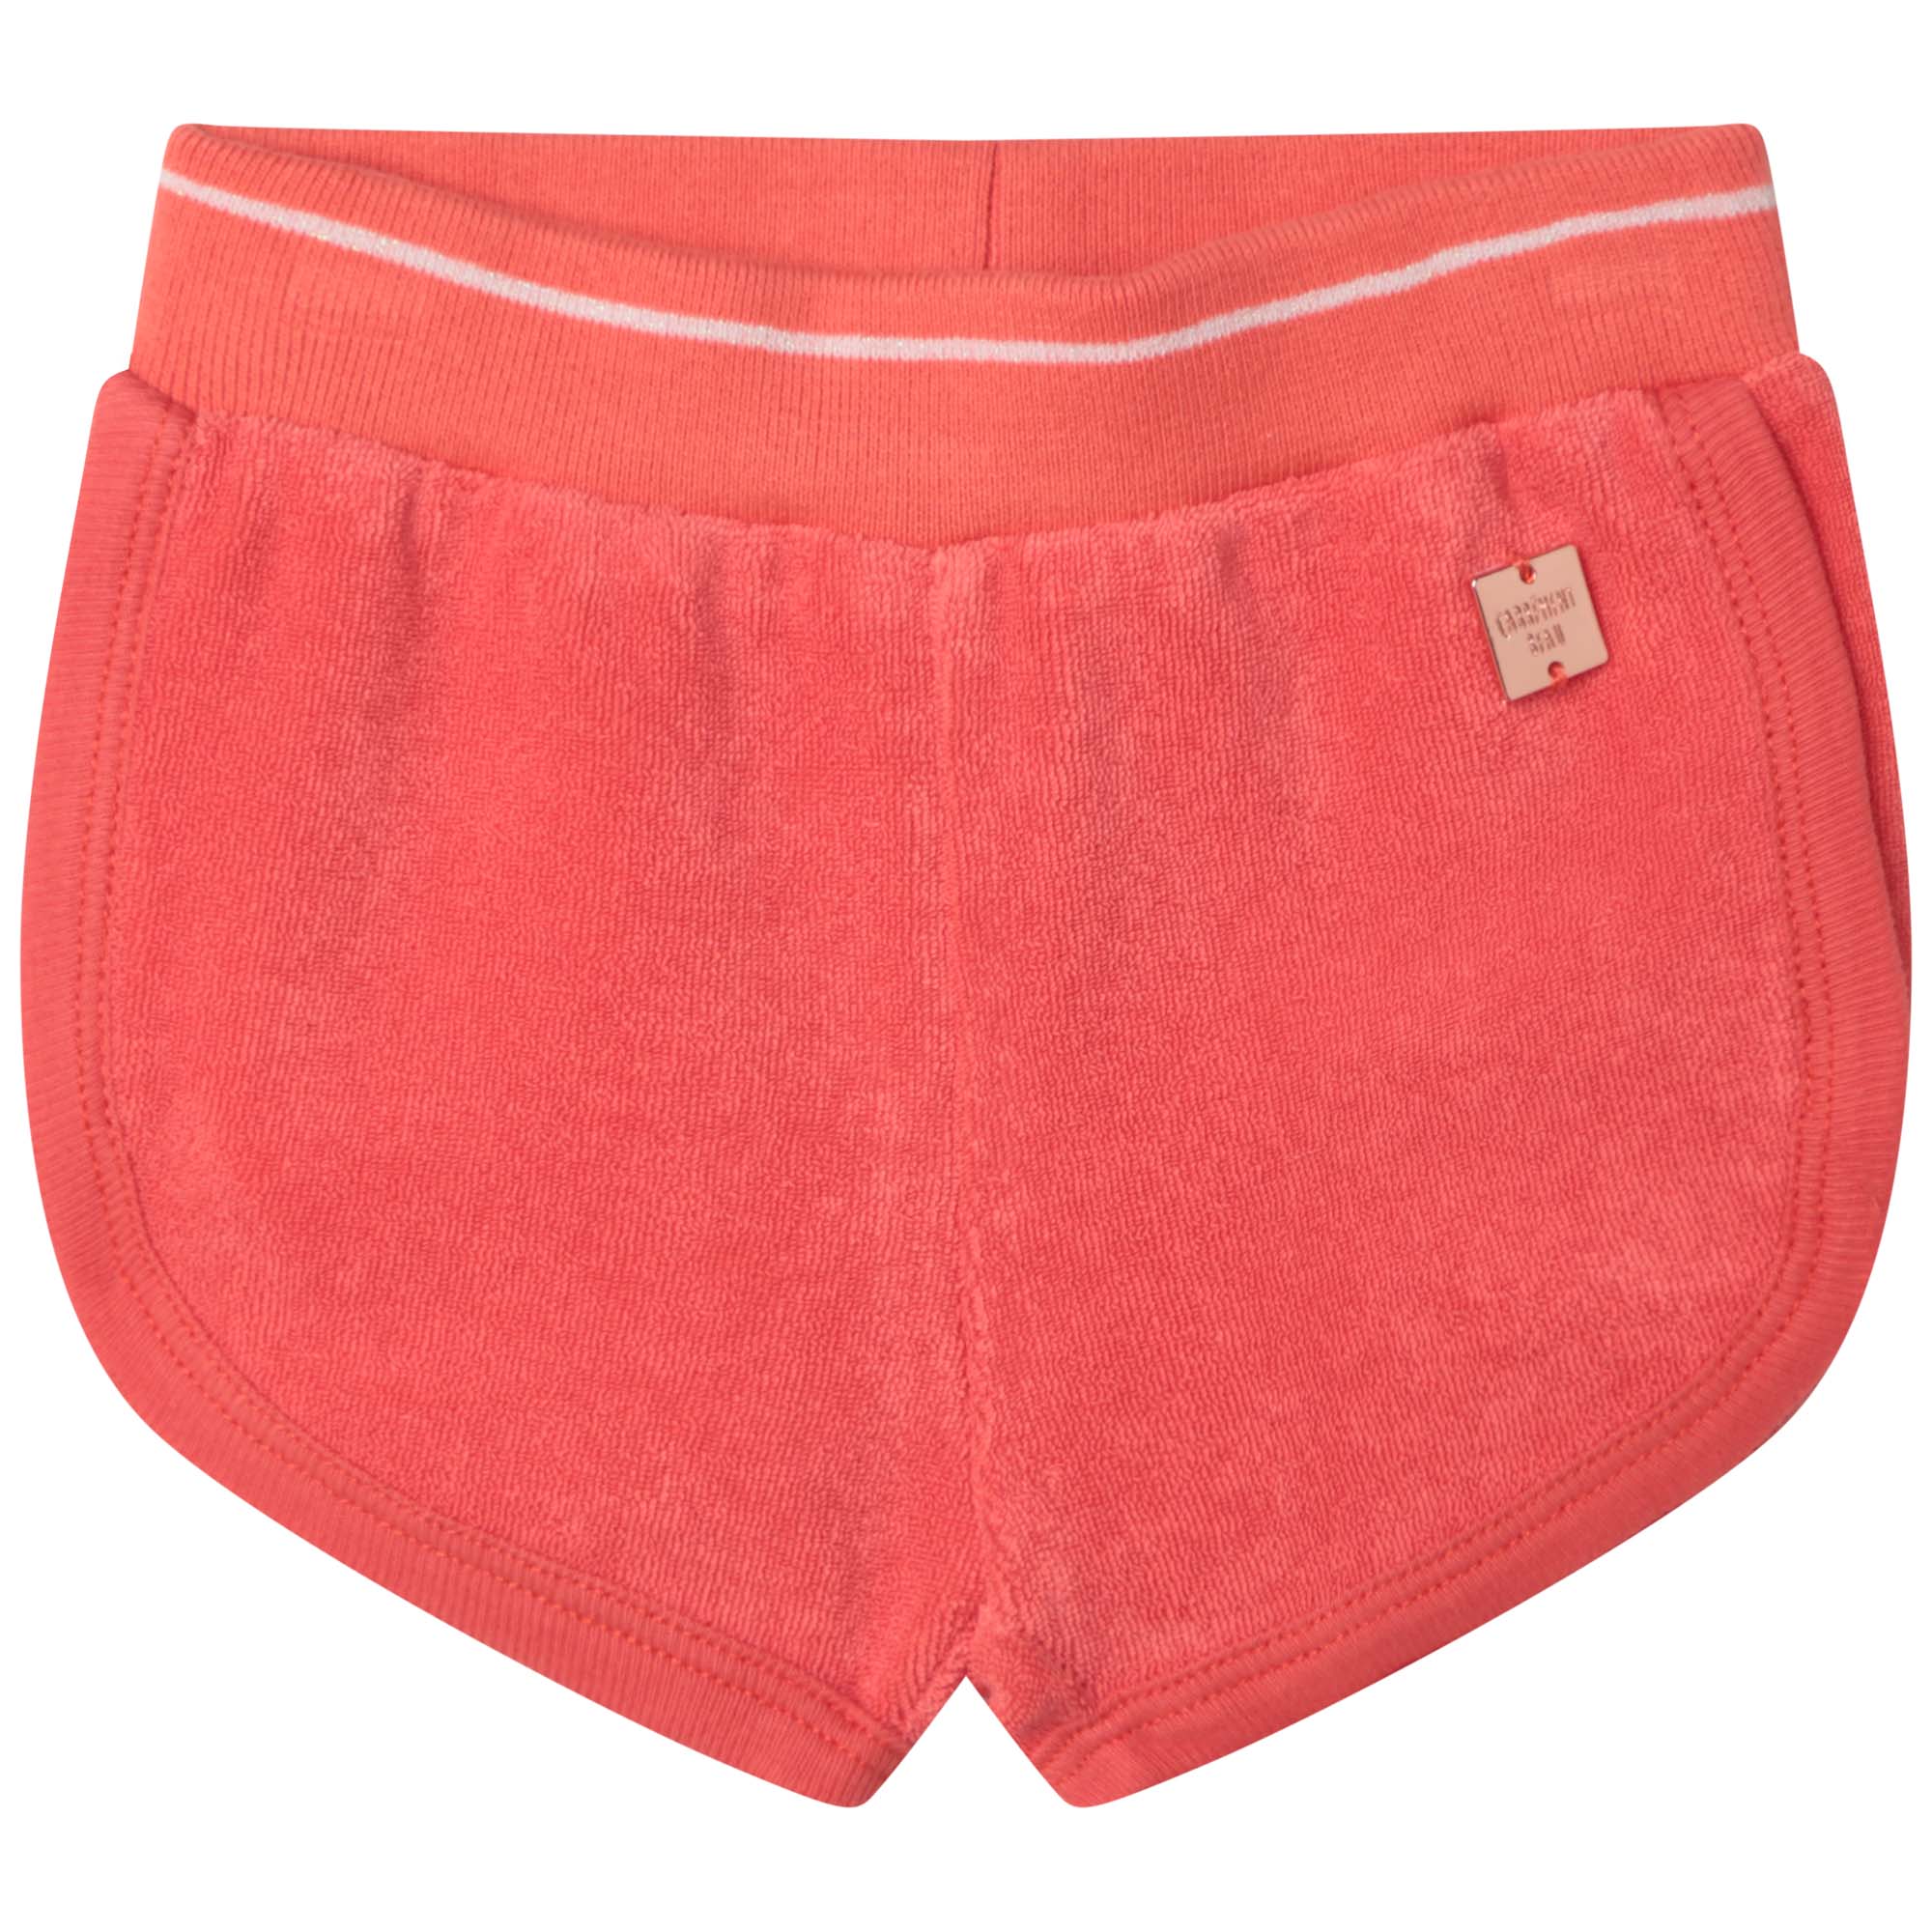 Short terry towel shorts CARREMENT BEAU for GIRL